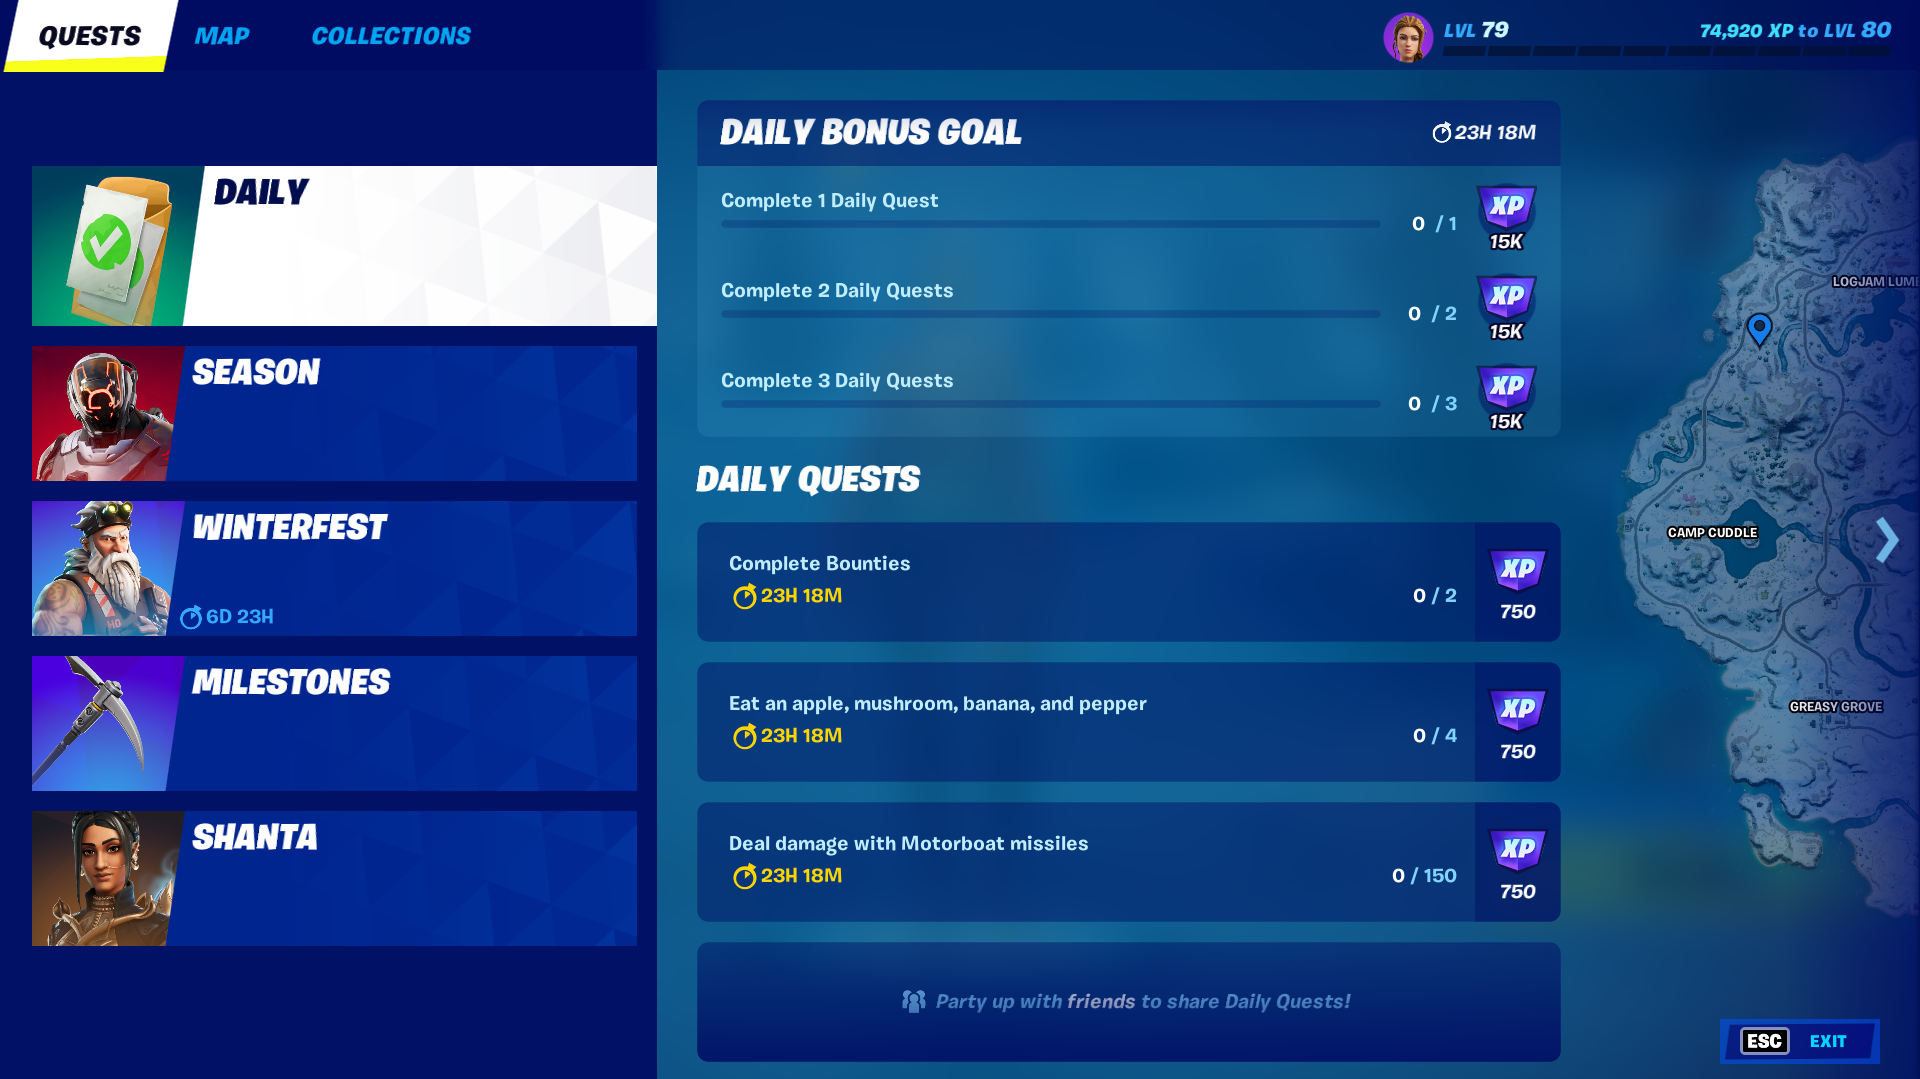 Fortnite V-Buck missions list, How to make bucks in Save the World